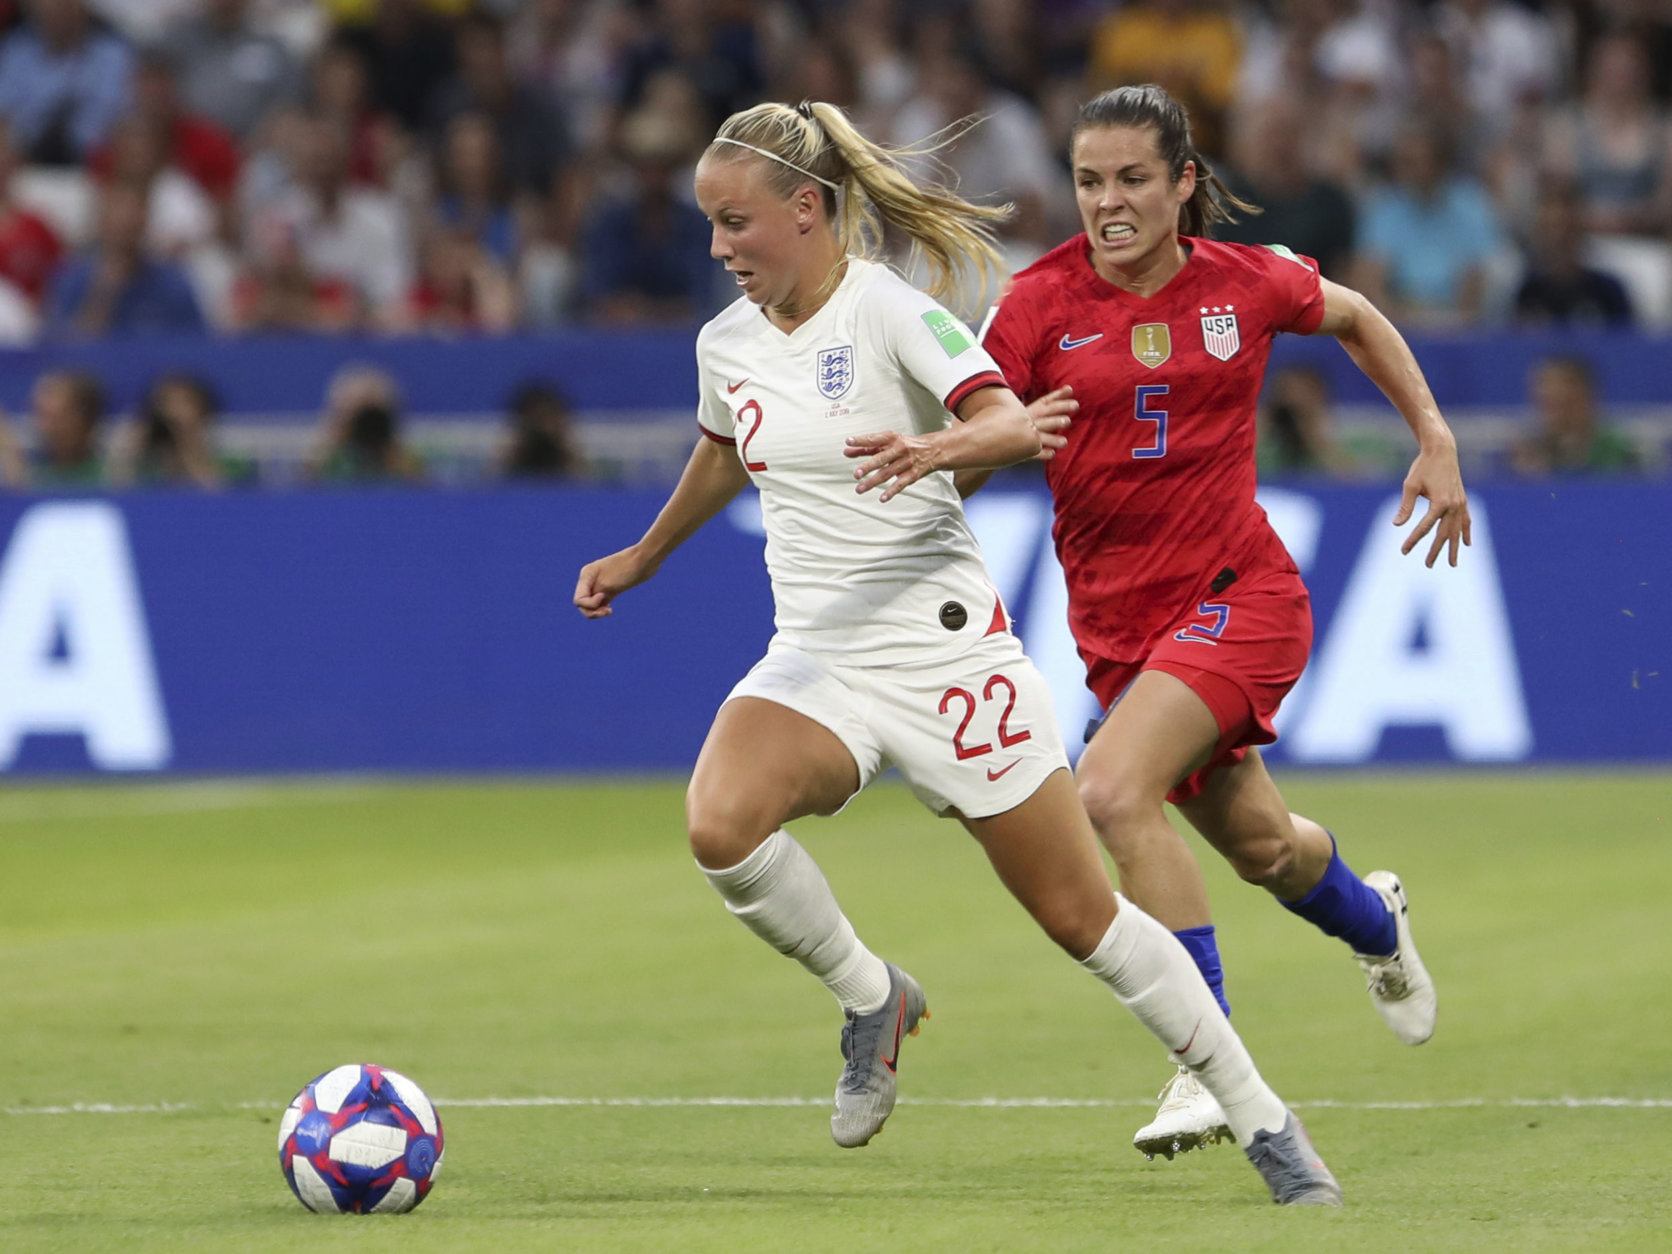 England's Beth Mead, left, and United States' Kelley O Hara challenge for the ball during the Women's World Cup semifinal soccer match between England and the United States, at the Stade de Lyon outside Lyon, France, Tuesday, July 2, 2019. (AP Photo/Laurent Cipriani)